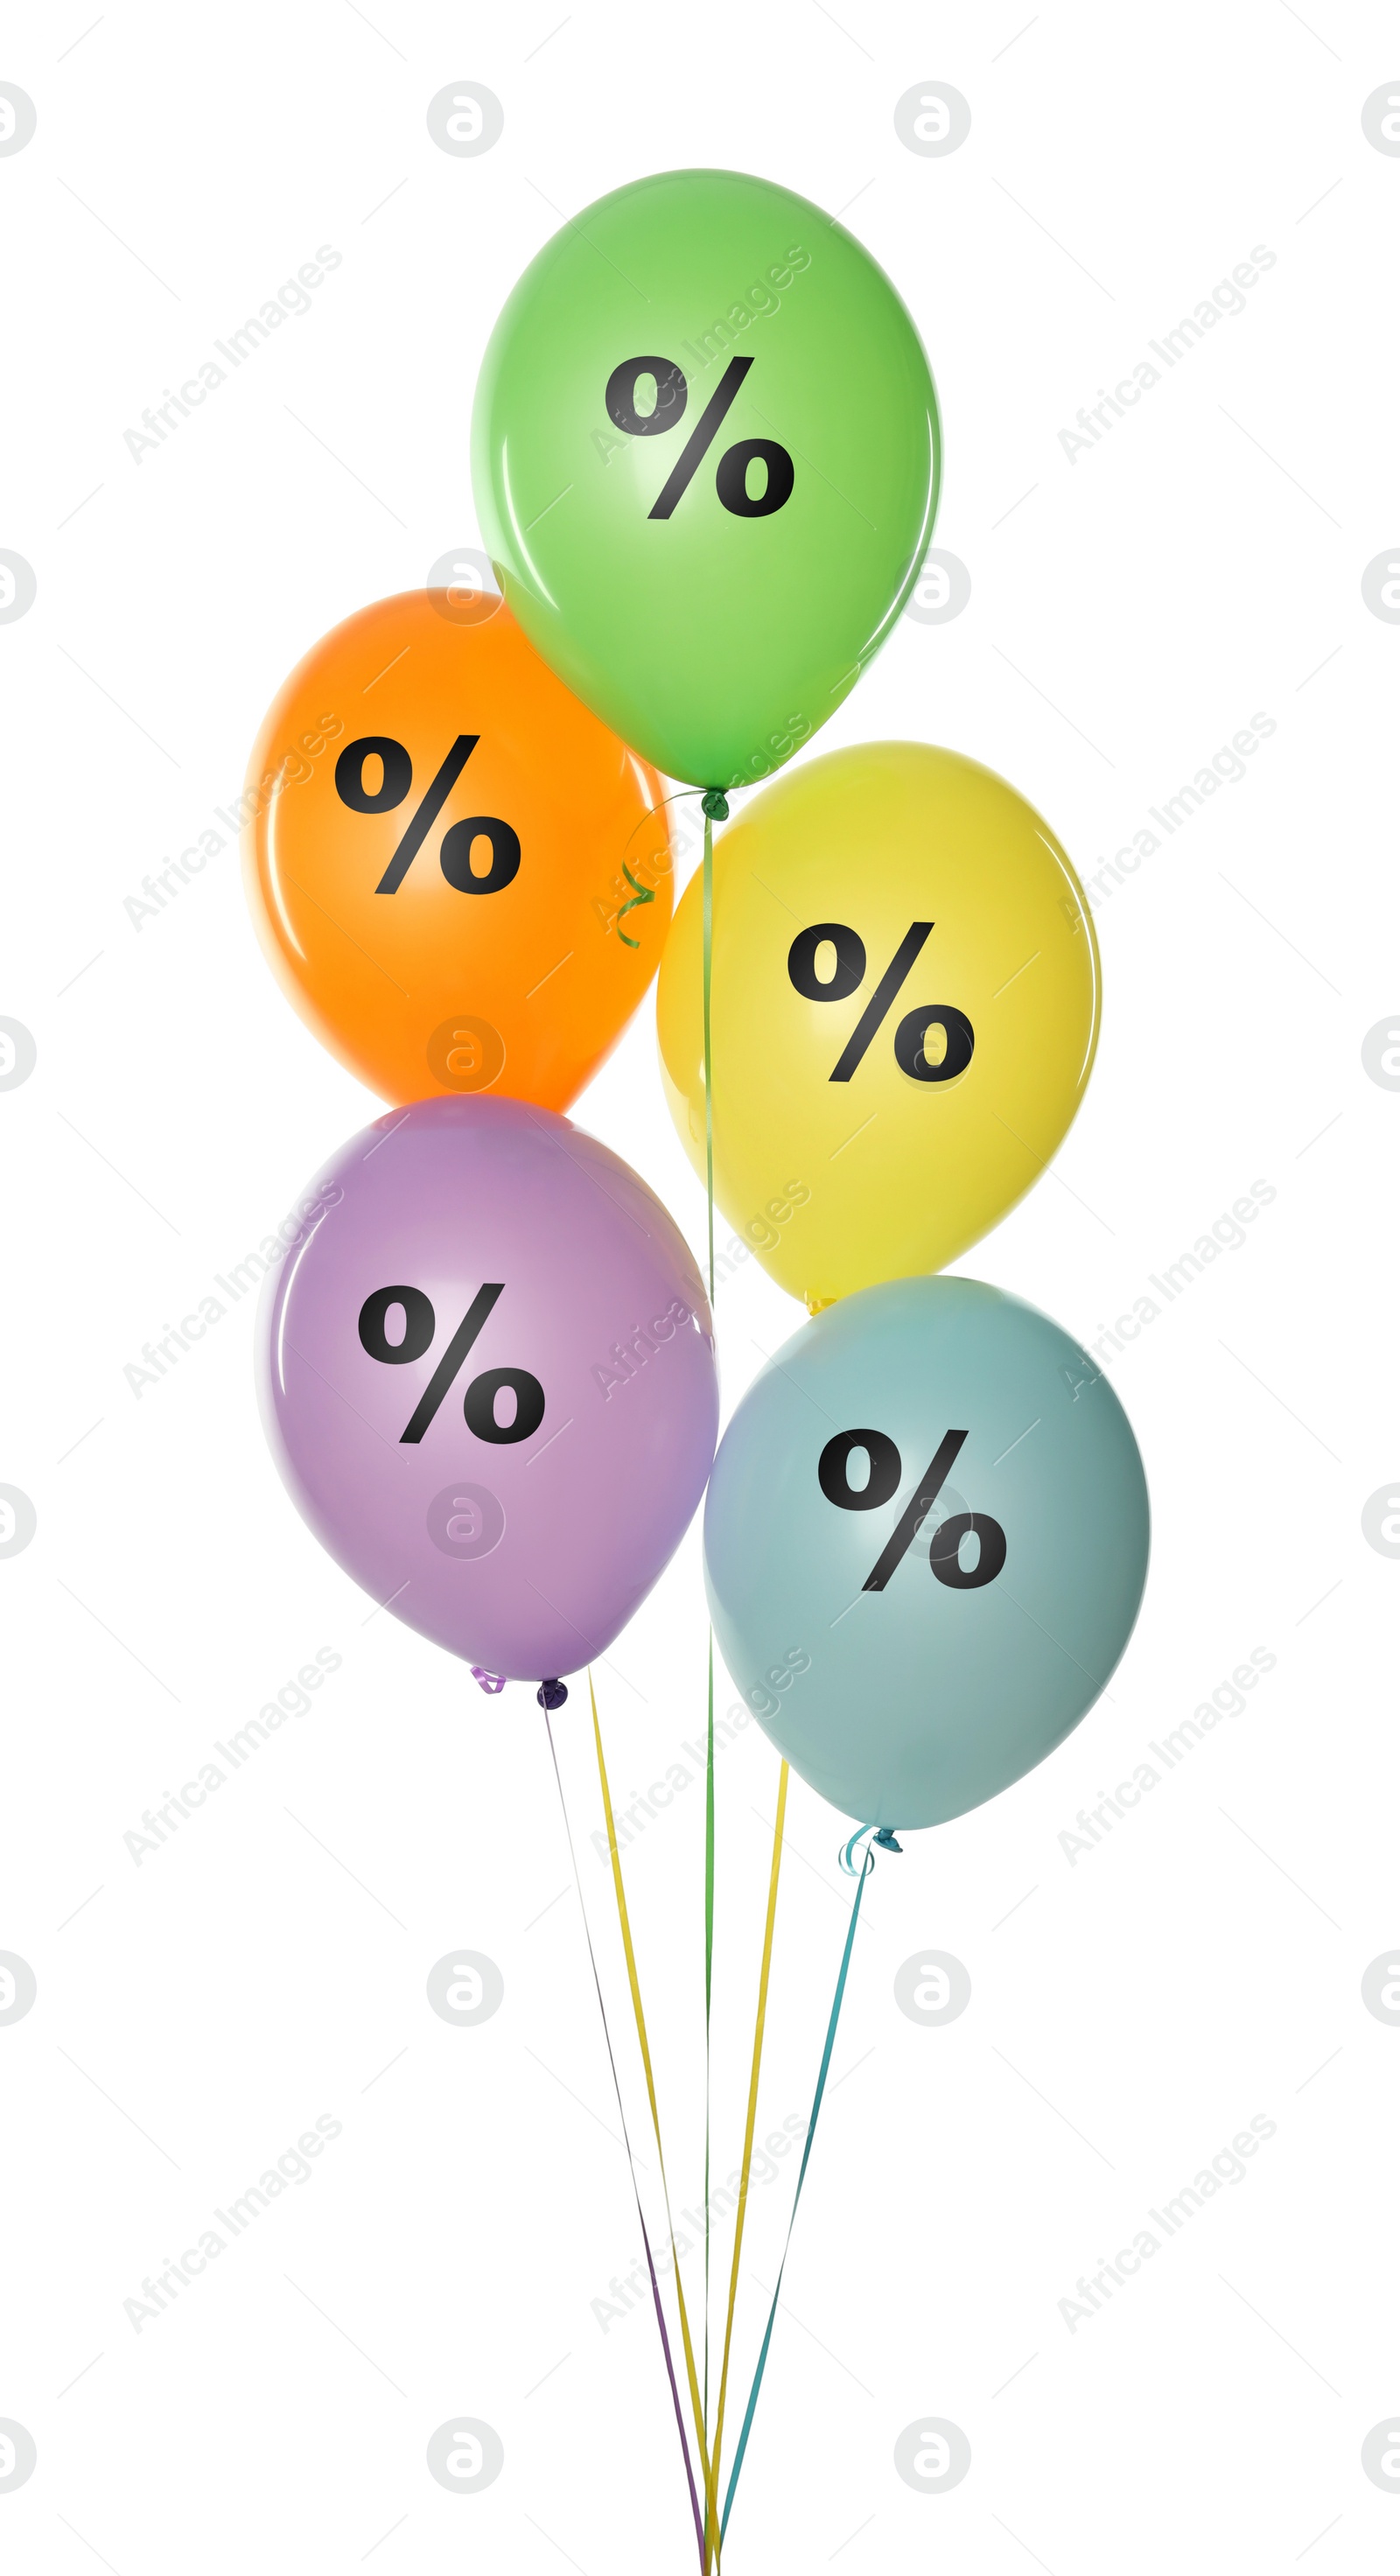 Image of Discount offer. Bright balloons with percent sign on white background